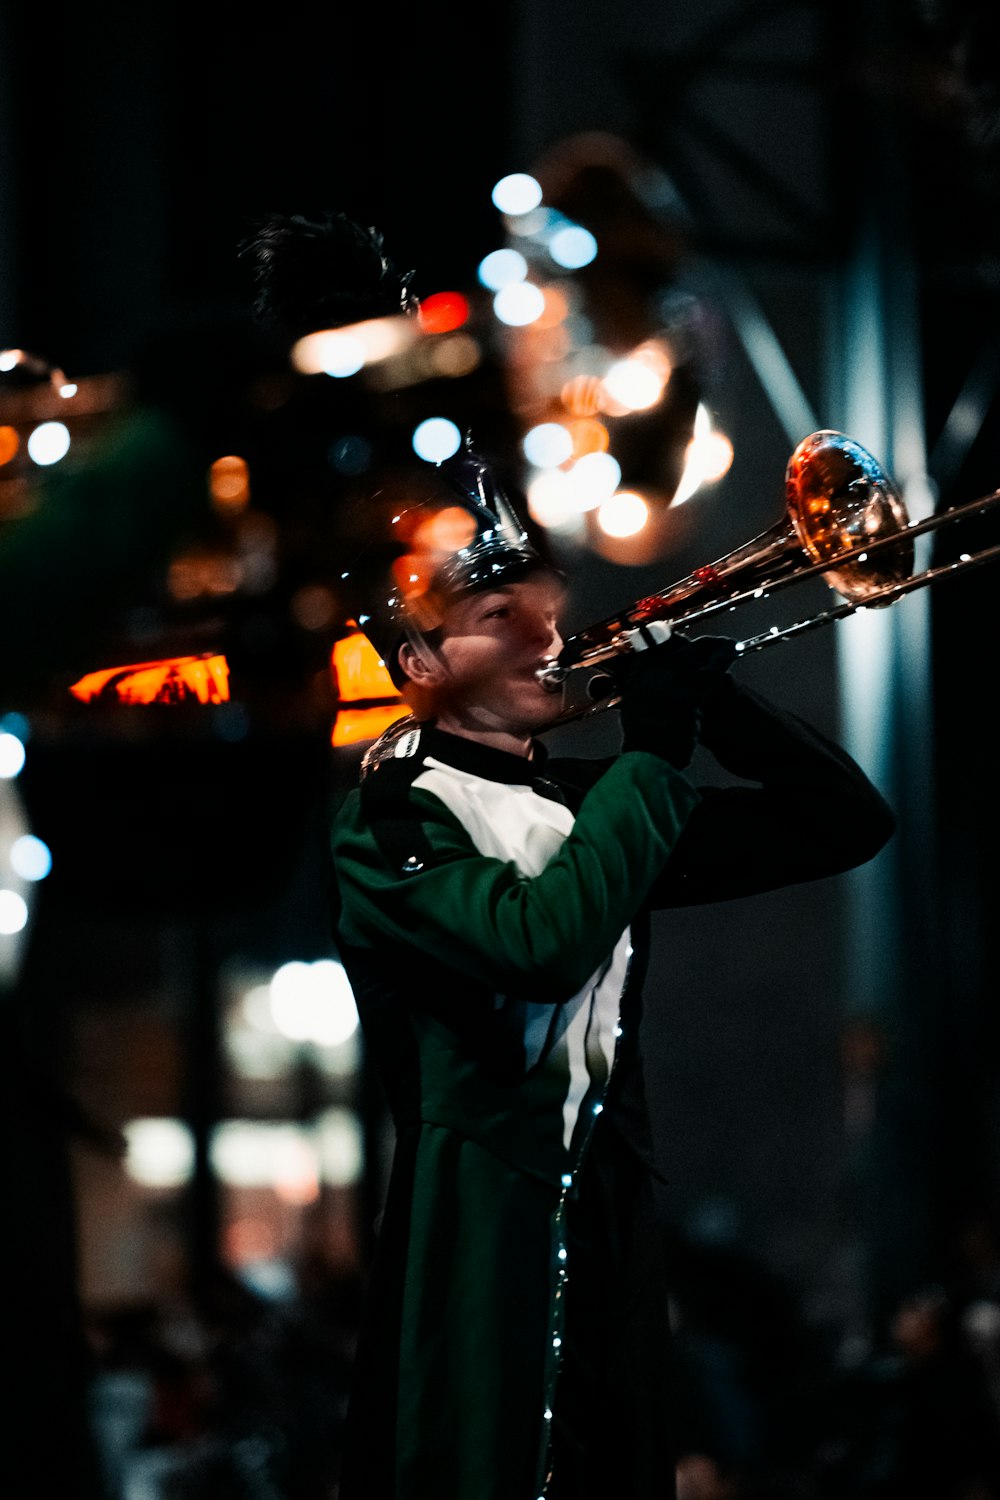 a man in a green coat playing a trombone